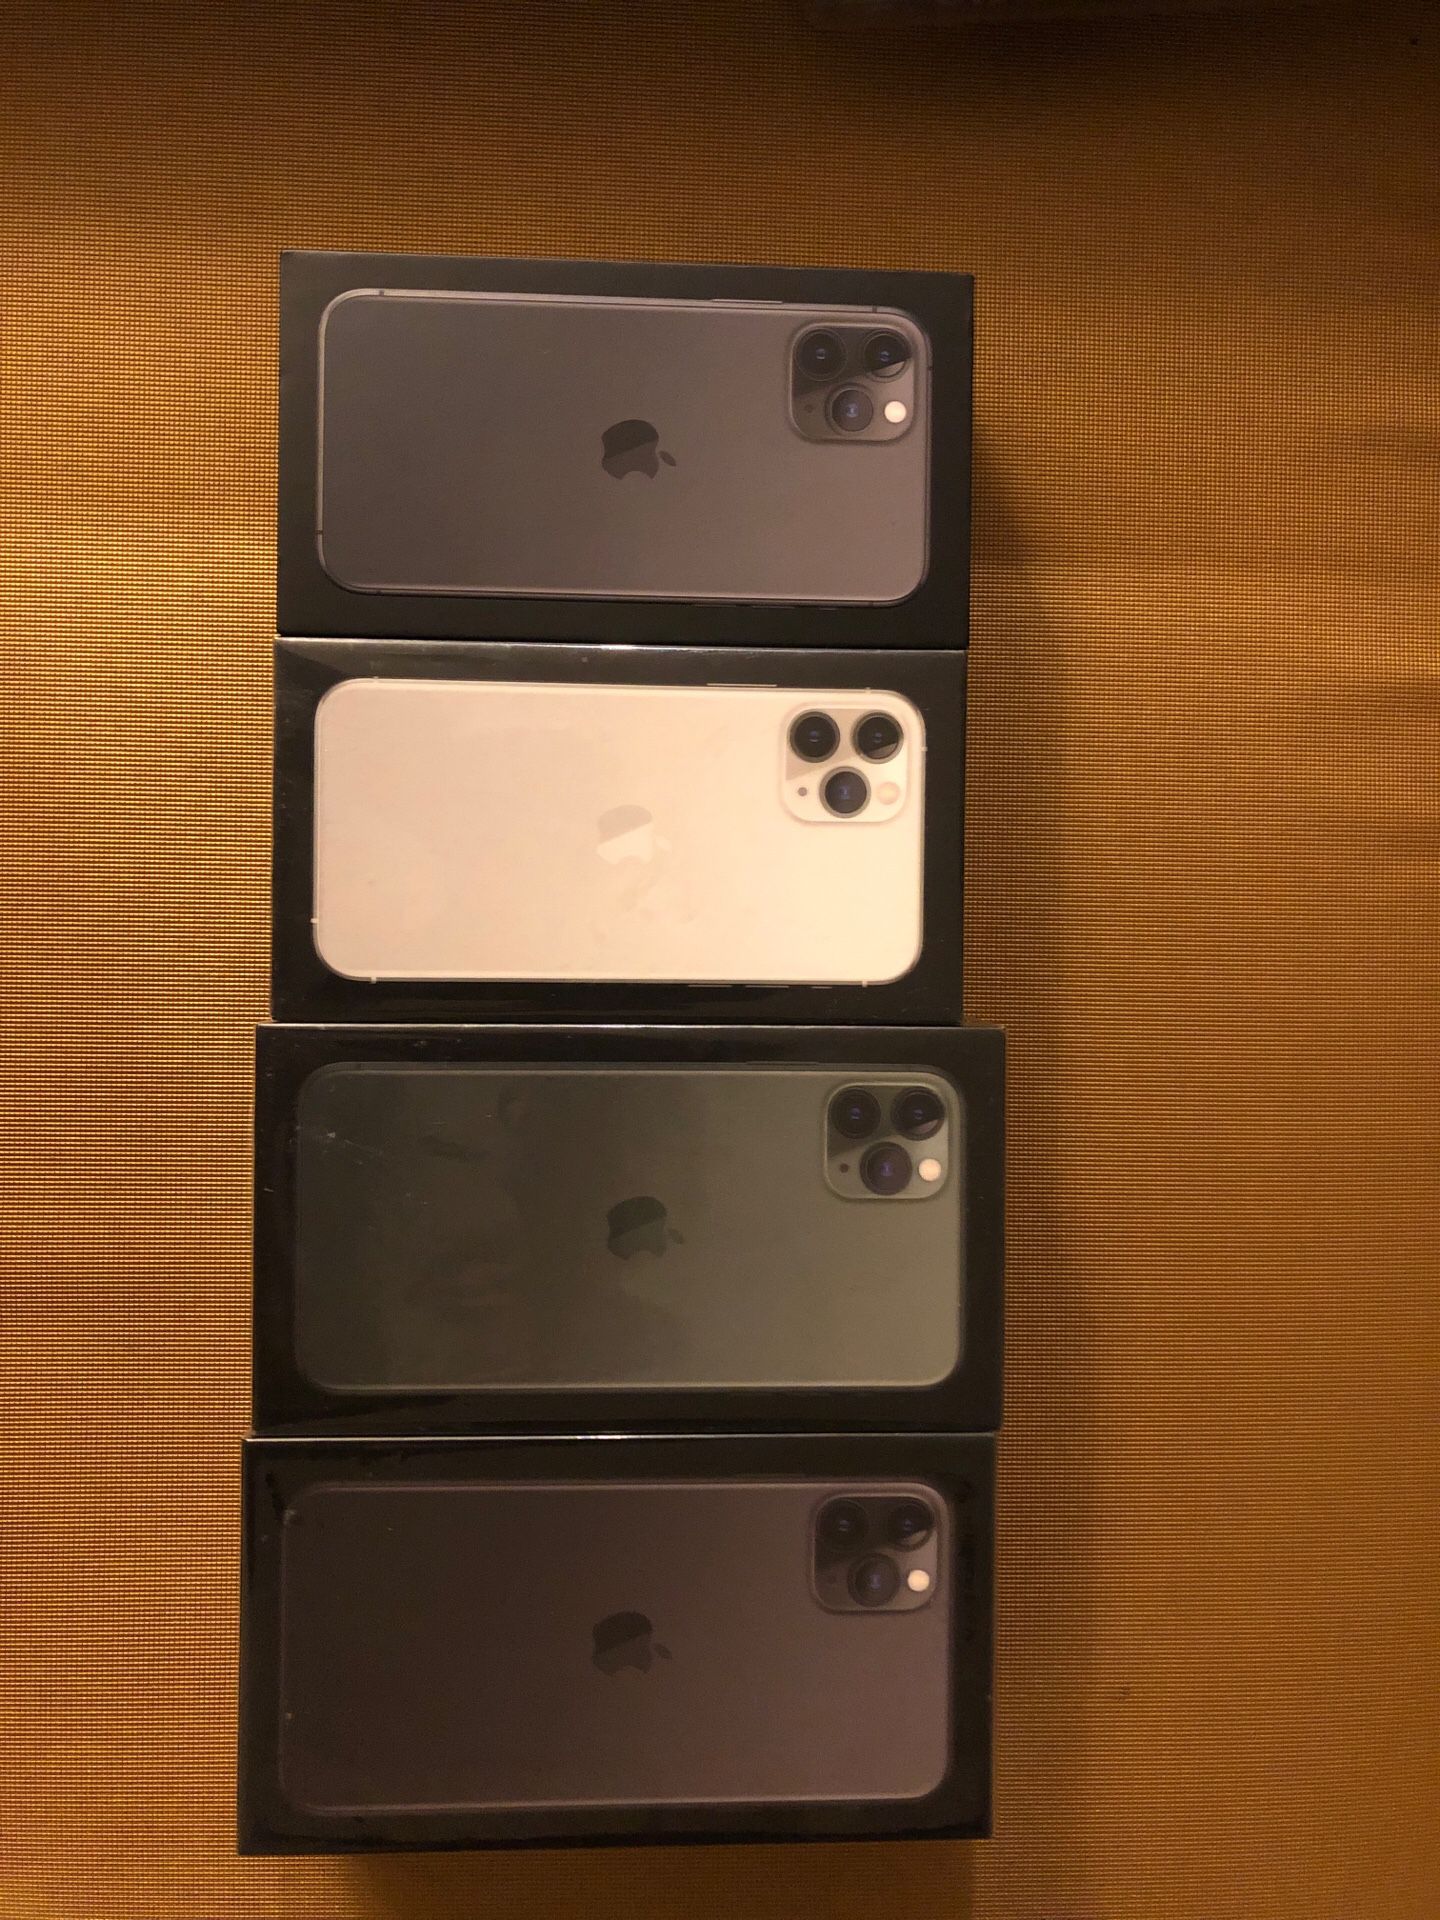 iPhone 11 Pros and Pro Max for sale